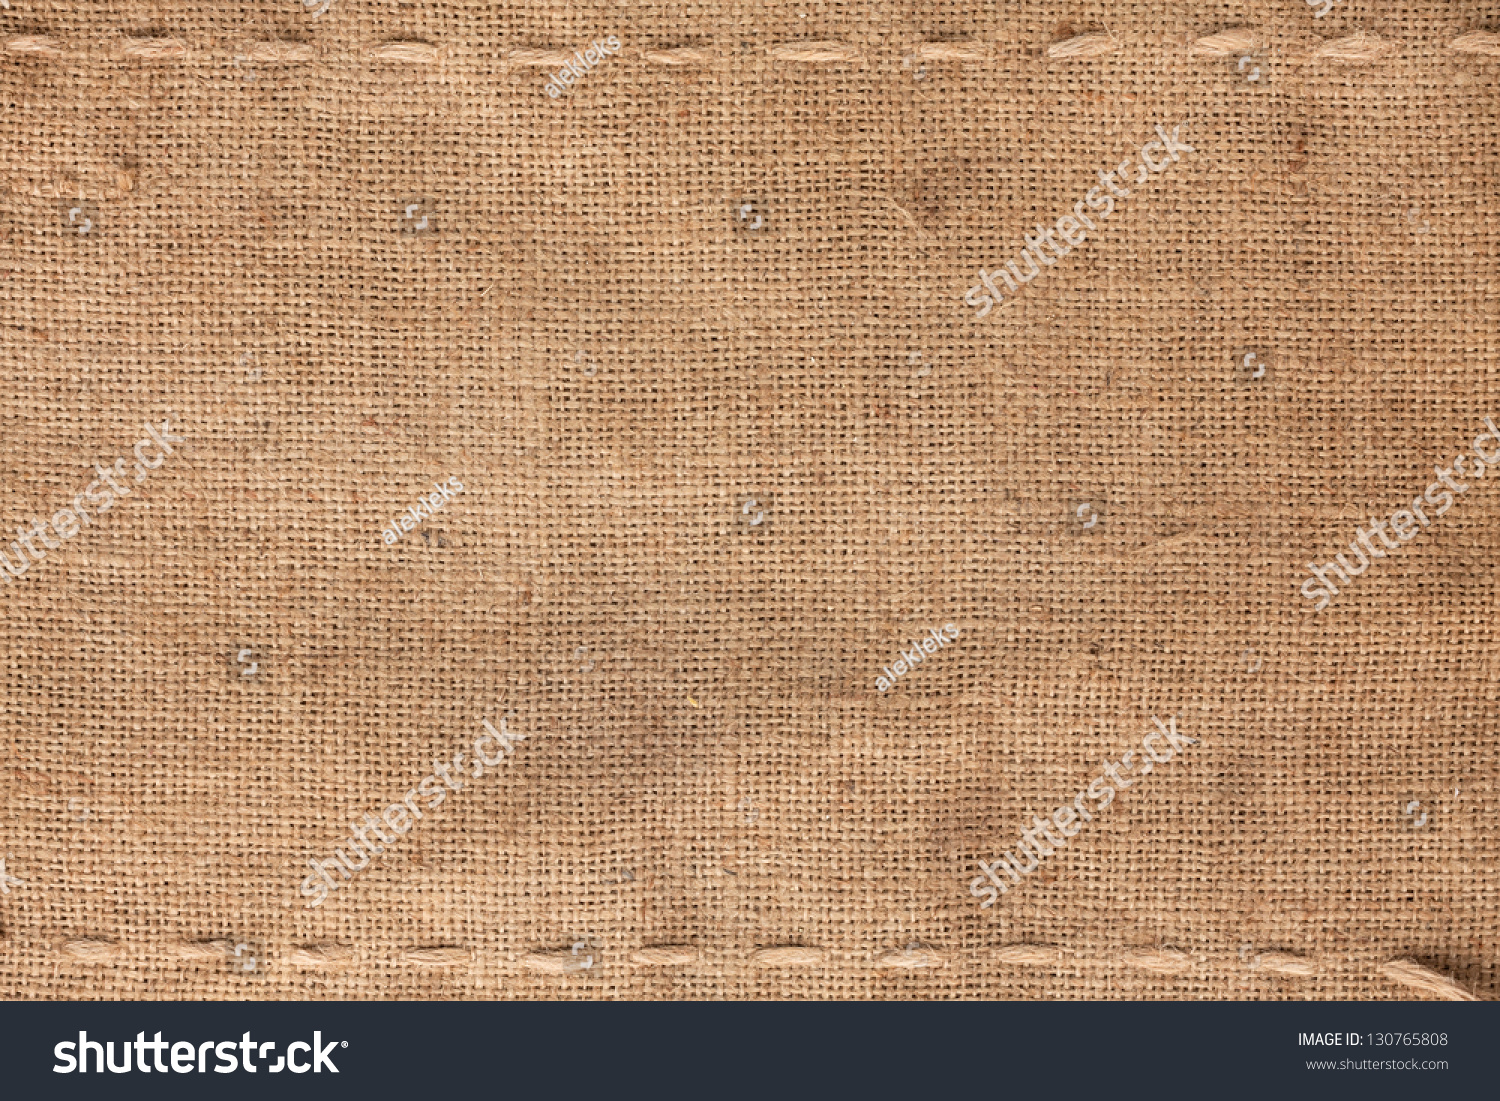 The two horizontal stitching on the burlap as background #130765808